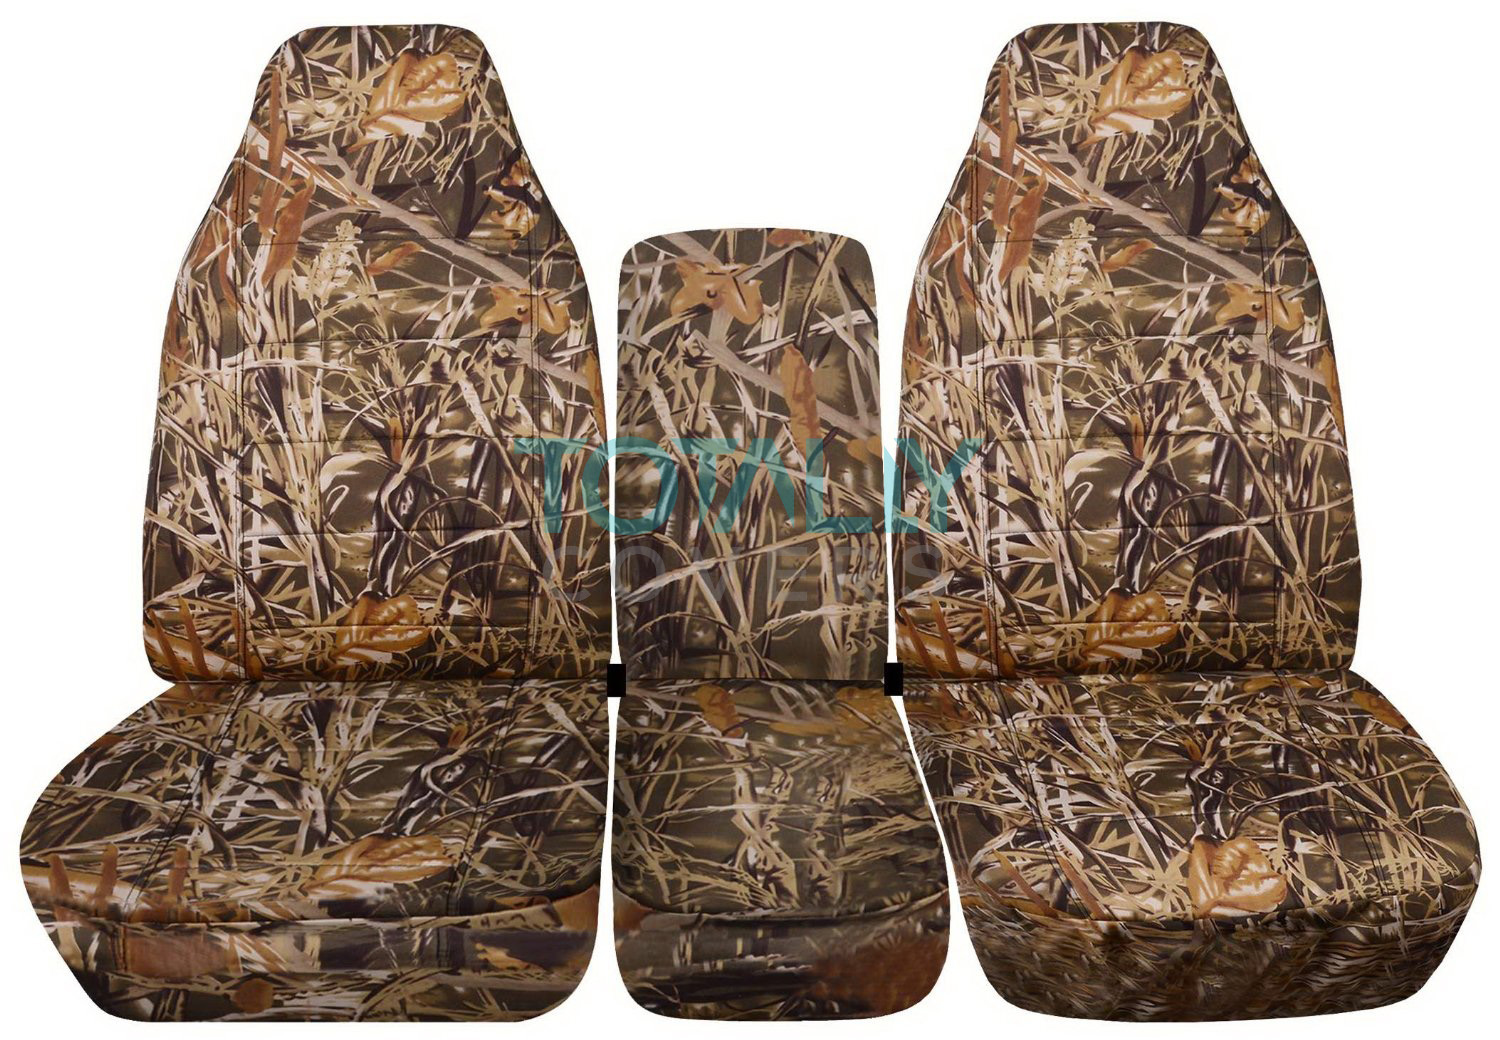 1993-1998 Ford F-Series F-150/250/350 40/20/40 Camo Truck Seat Covers w Console